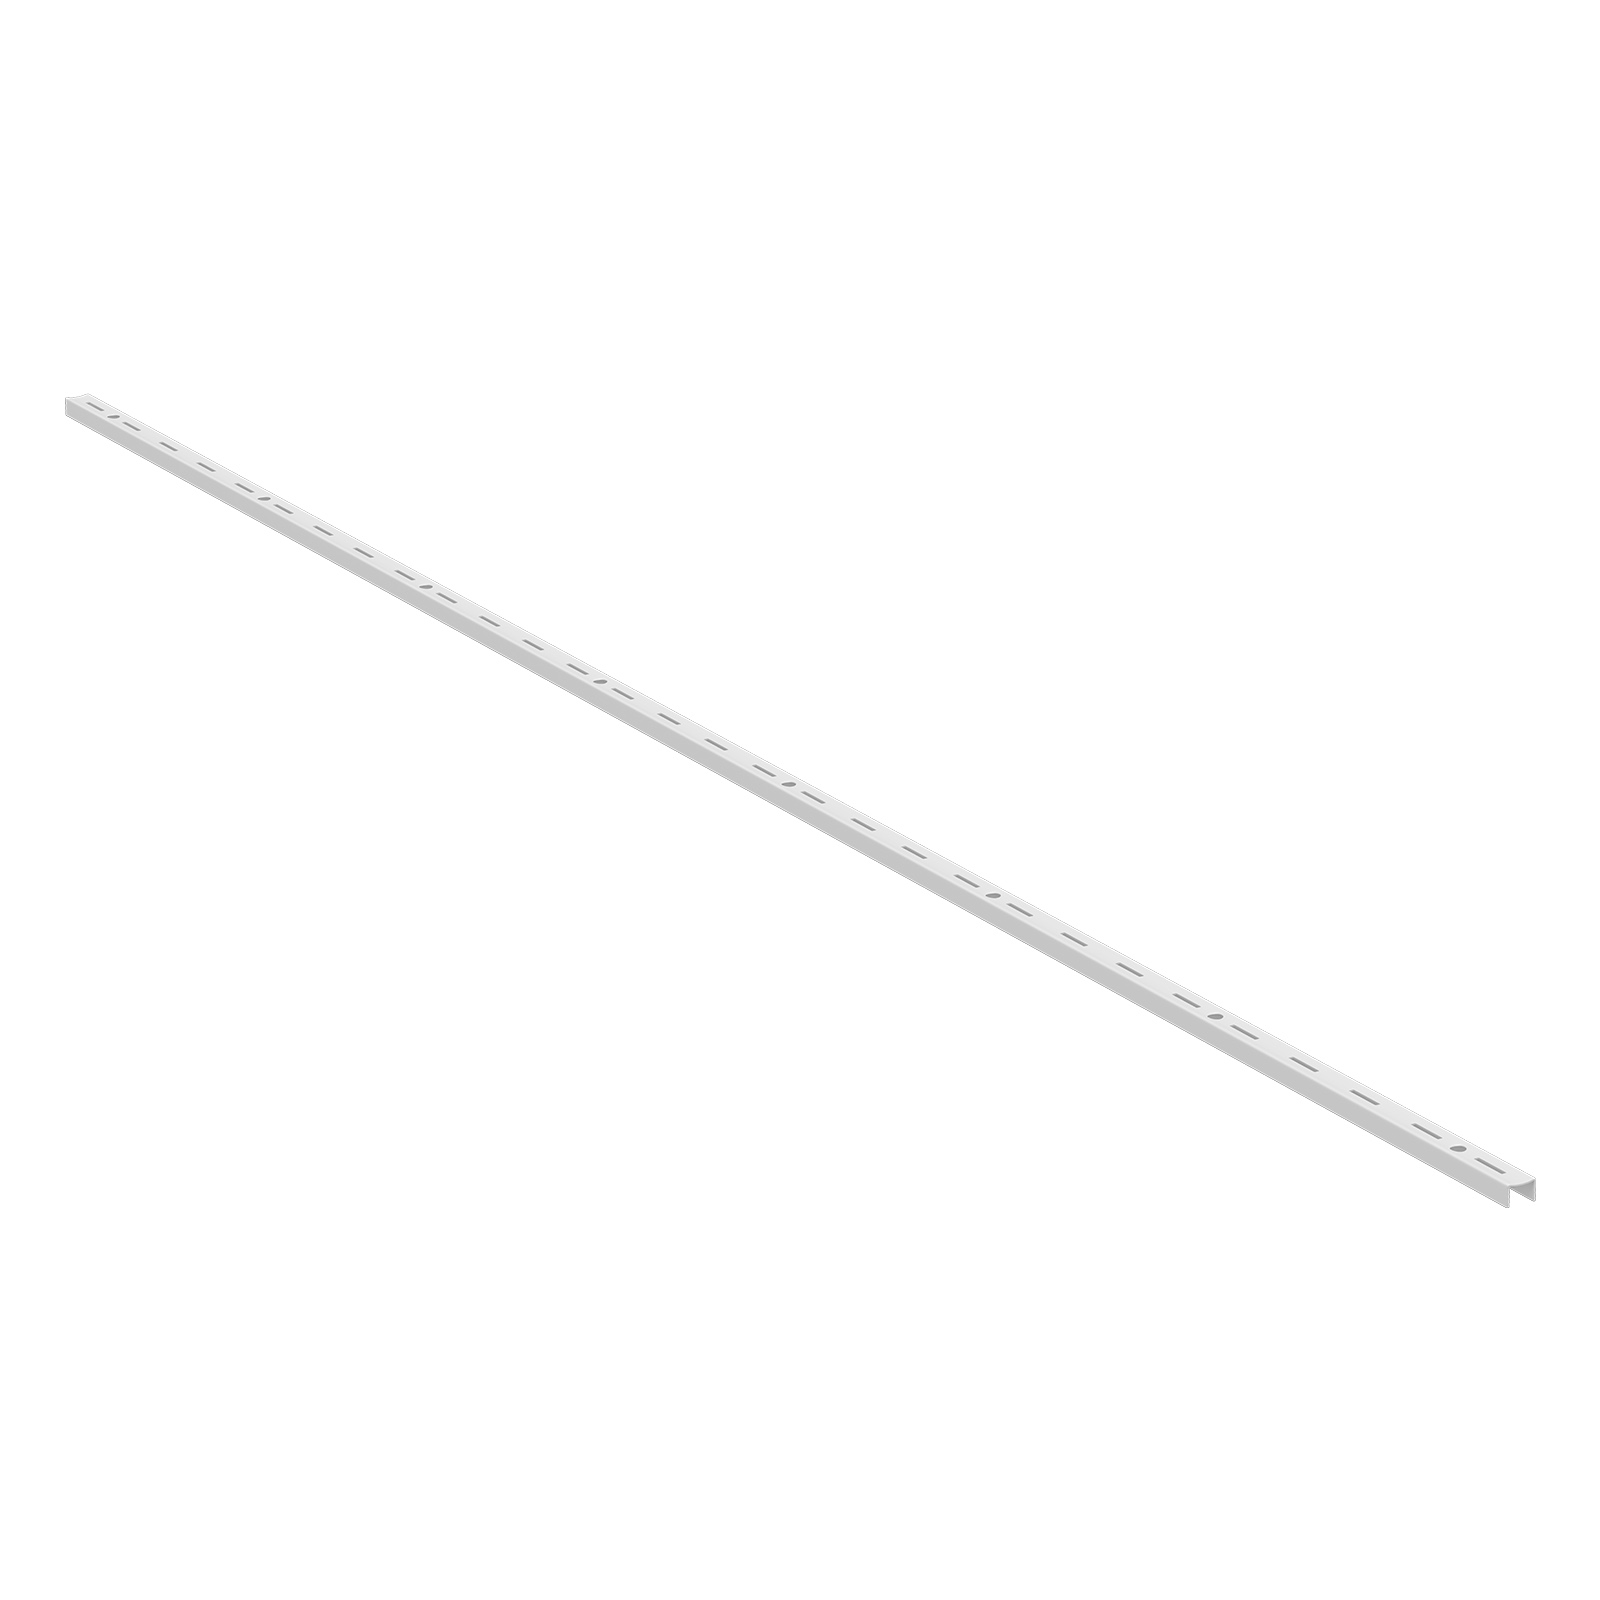 Home Solutions Single Slot Wall Strip White 1500mm